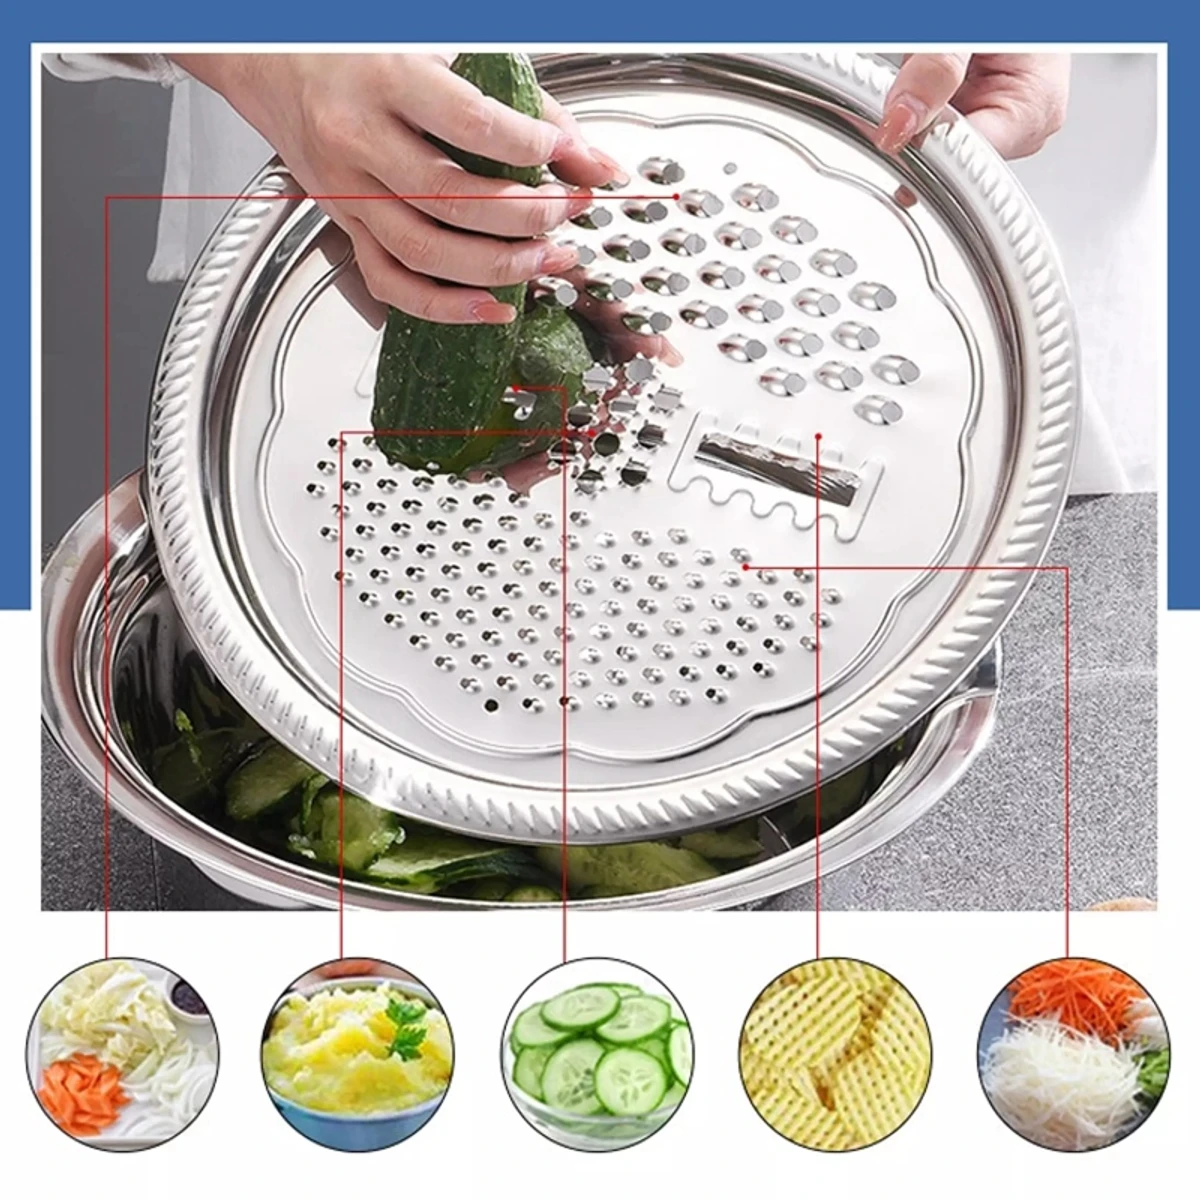 singslife Stainless Steel Basin with Grater Multifunctional Drain Basket with Vegetable Cutter 3 in 1 Cheese Grater with Drain Basin for Washing Vegetables Fruits Salad Maker Bowl